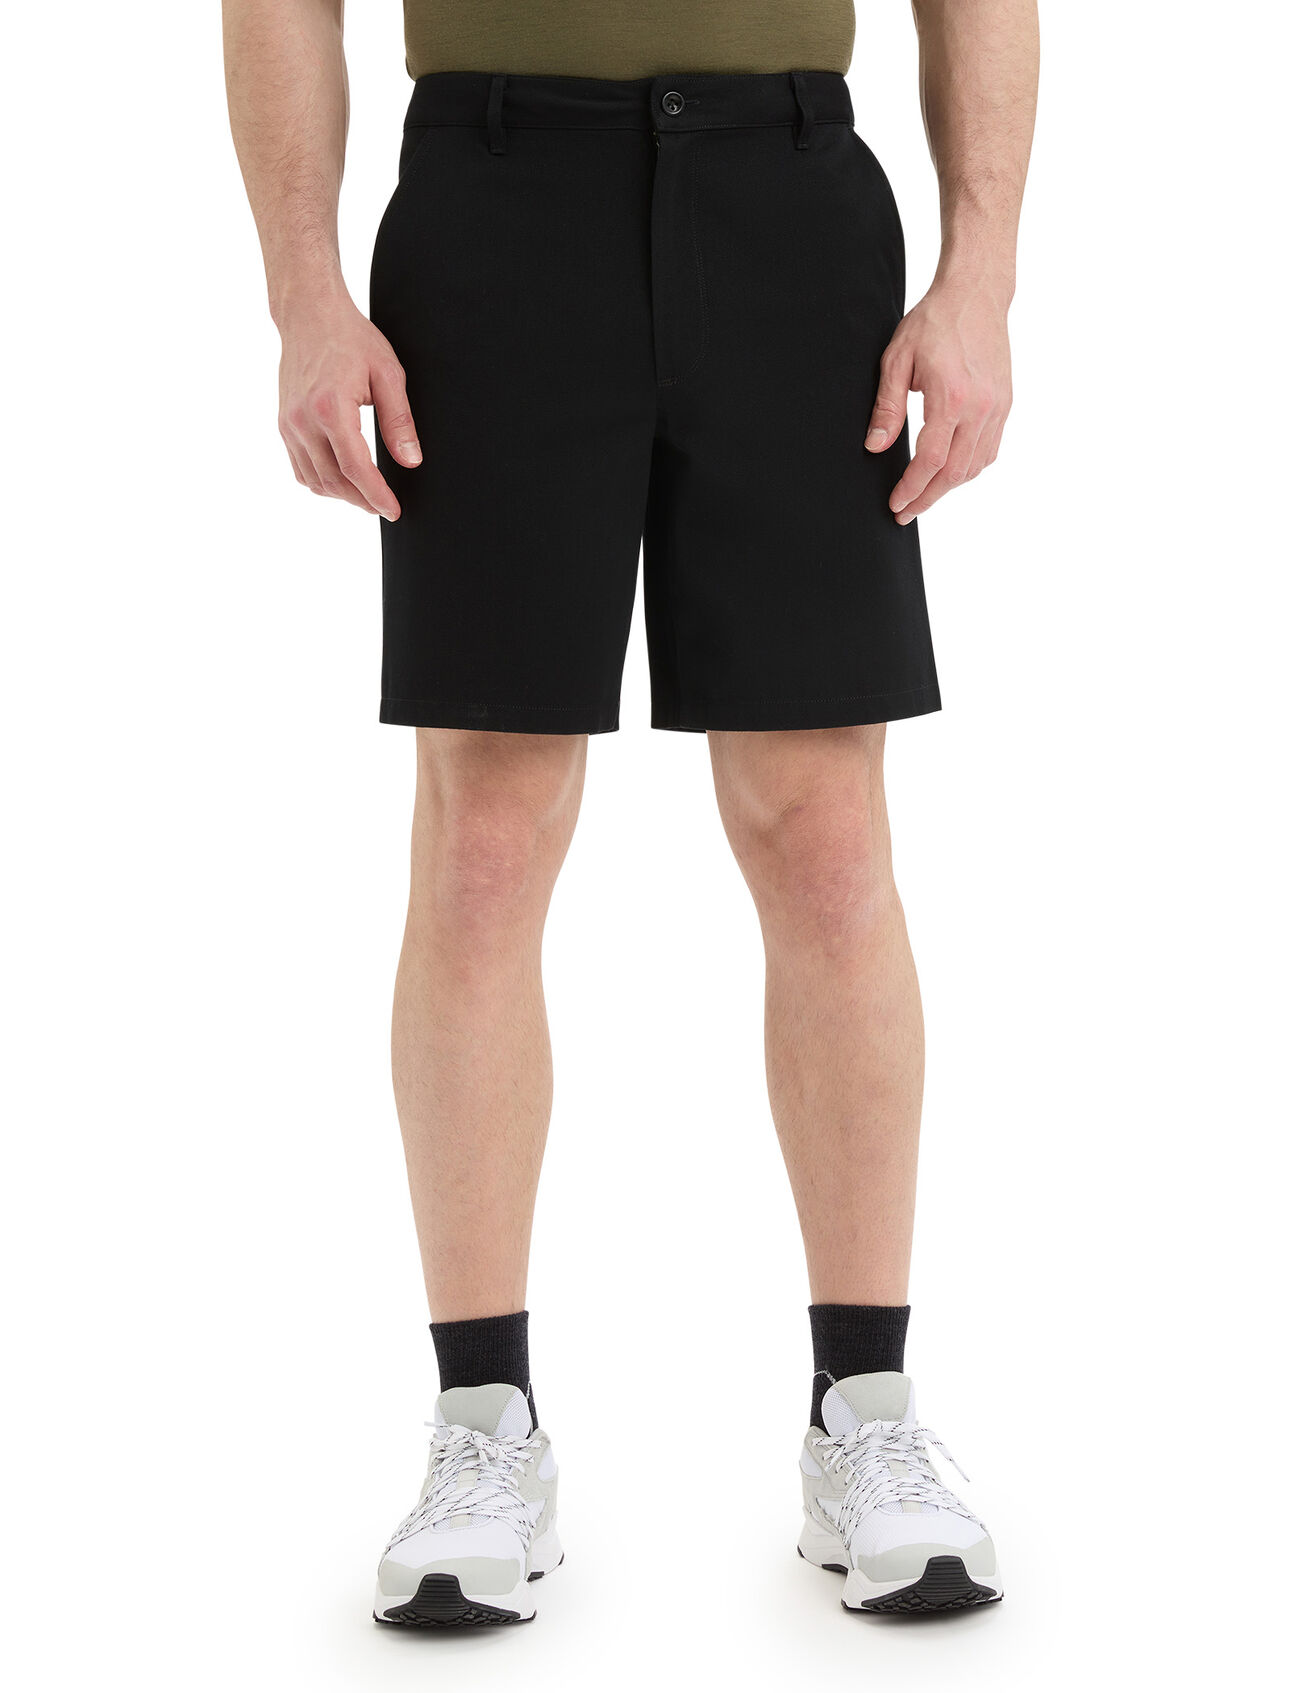 Mens Merino Berlin Shorts A classic, versatile chino short, the Berlin Shorts feature a unique and sustainable blend of all natural merino wool and organic cotton.